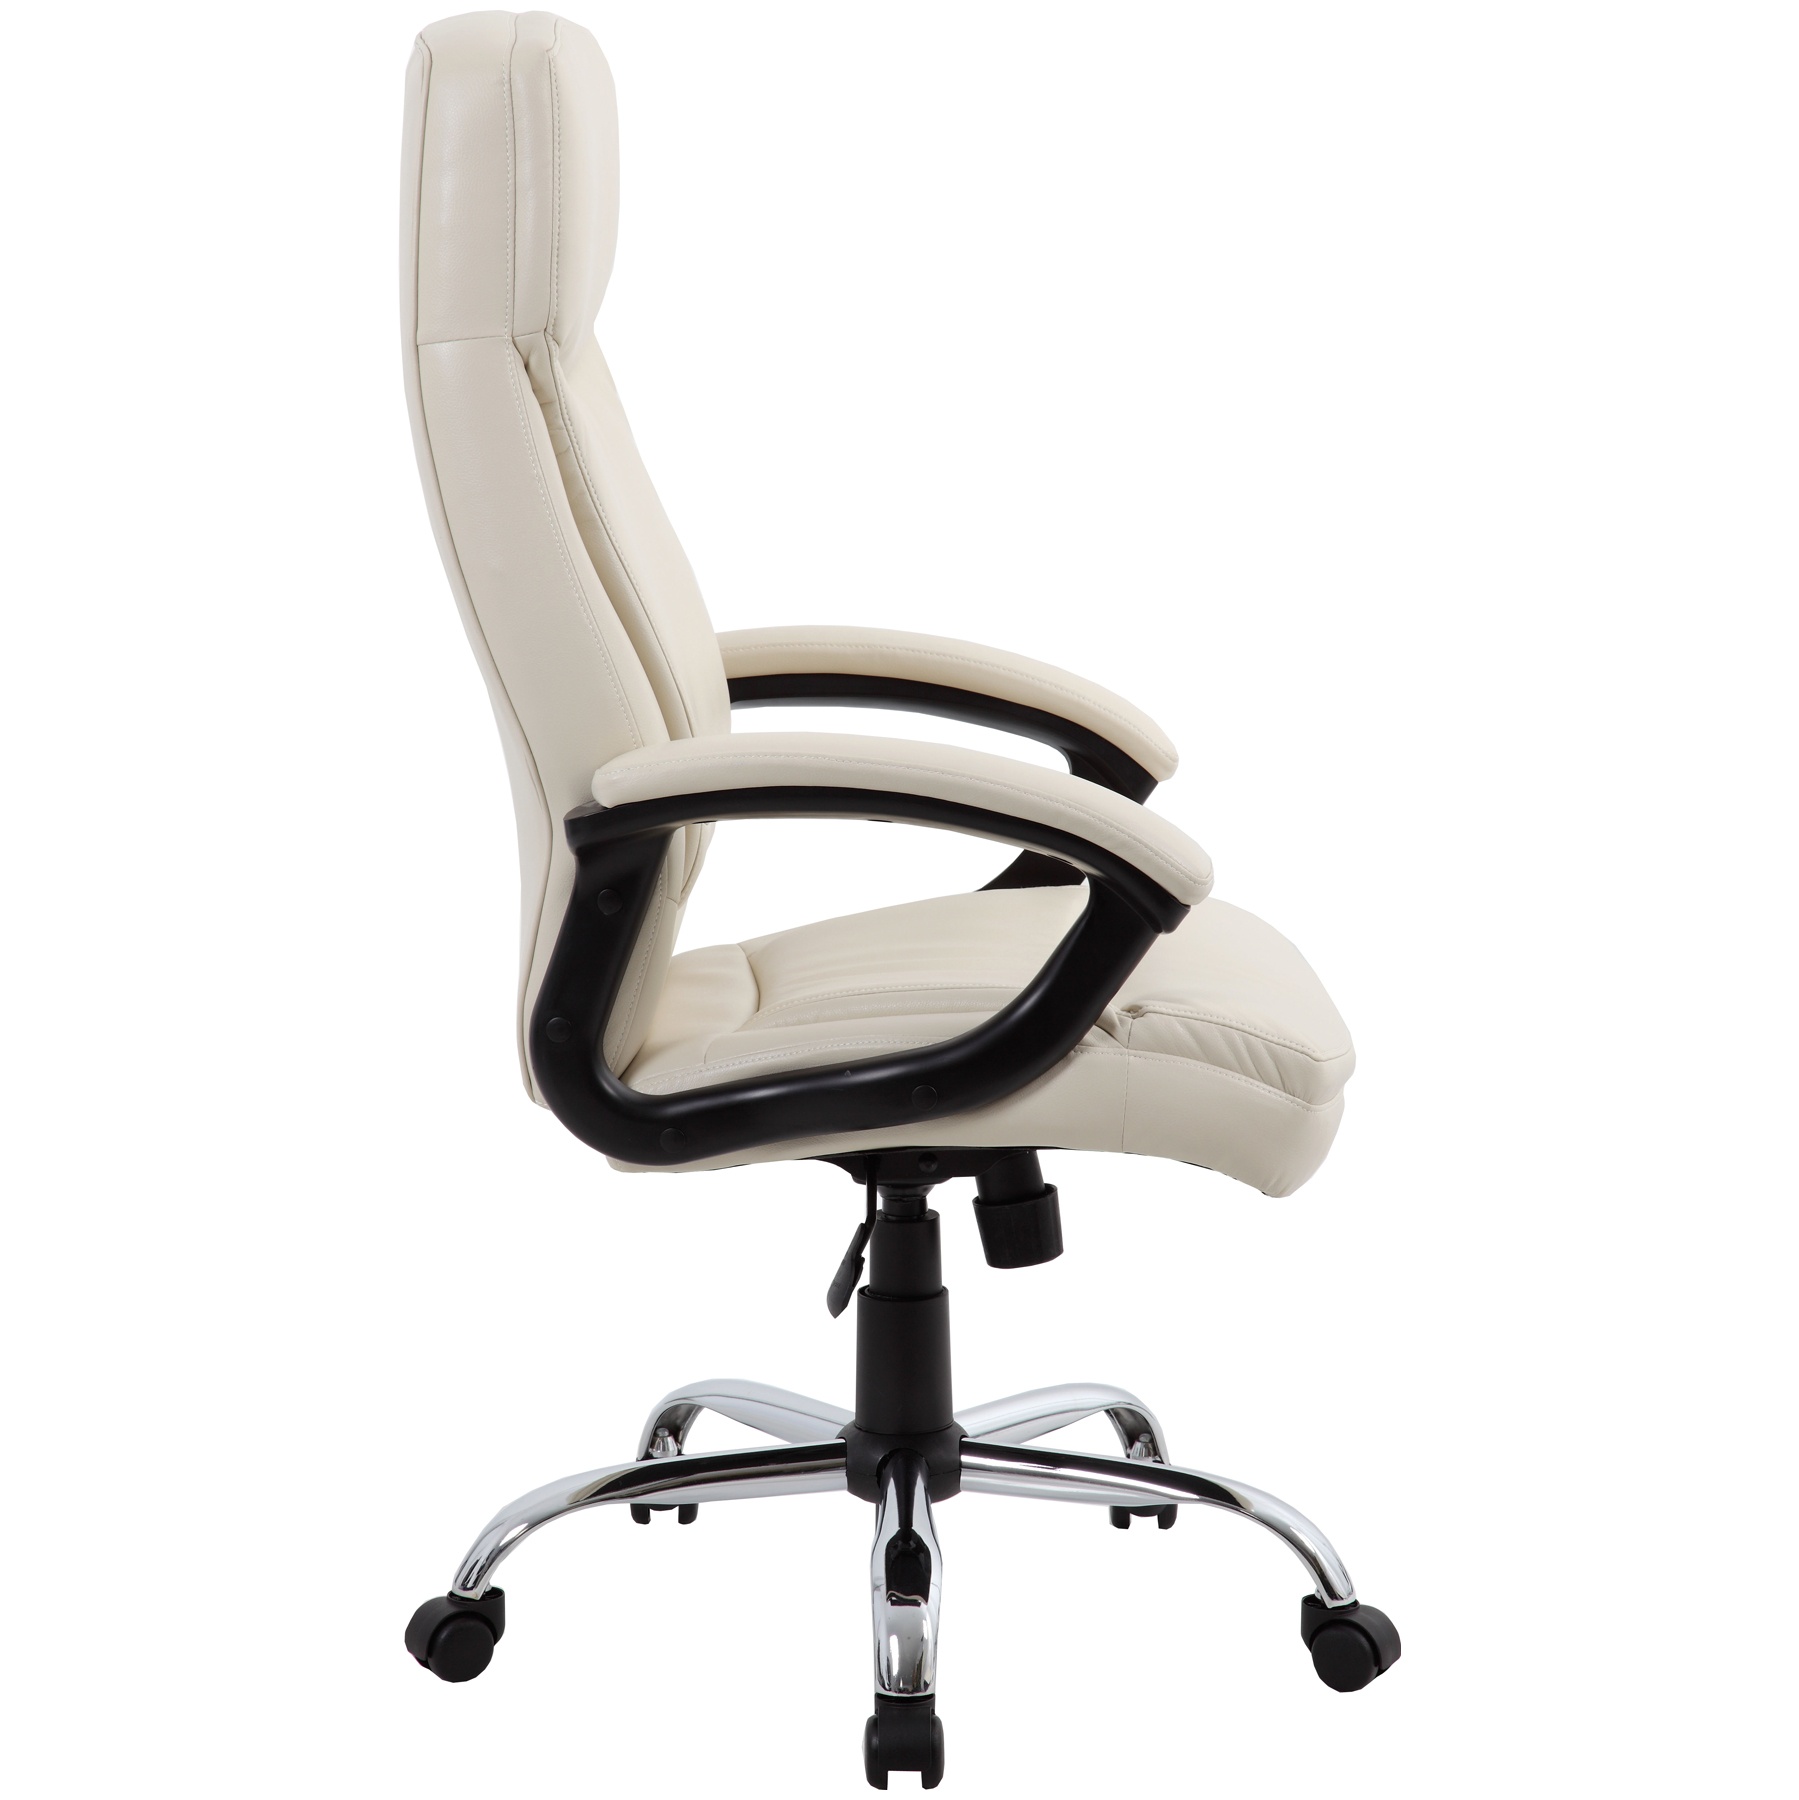 Modena Cream High Back Leather Manager Chairs